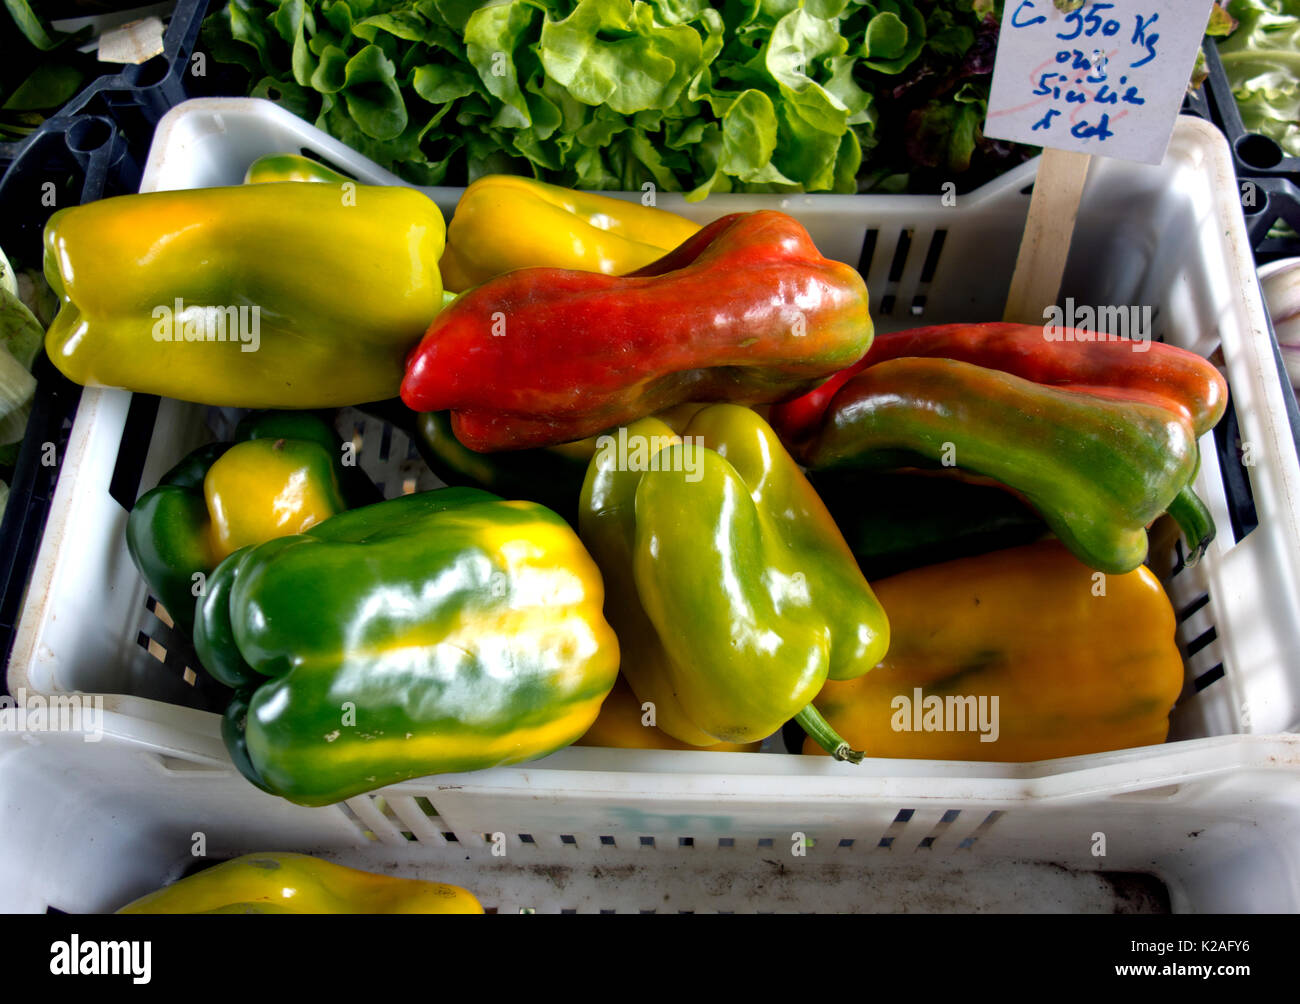 Bell peppers in an open market in Monterosso al Mare, Italy, 2017. Stock Photo